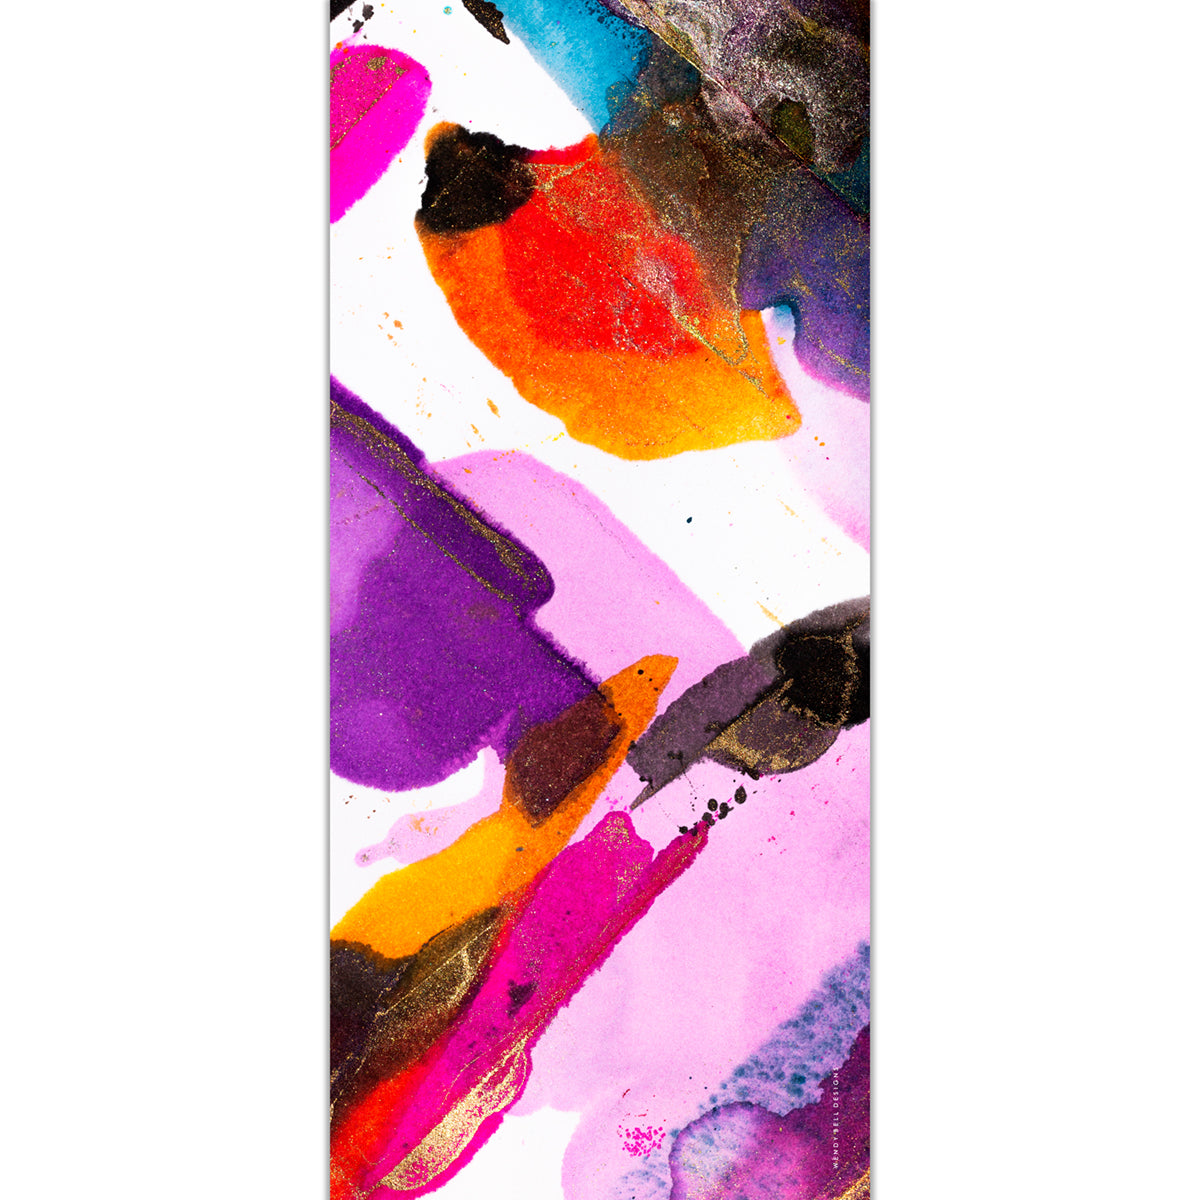 Abstract multi-coloured shapes creating a vibrant silk scarf design with Wendy Bell Designs logo in the bottom corner